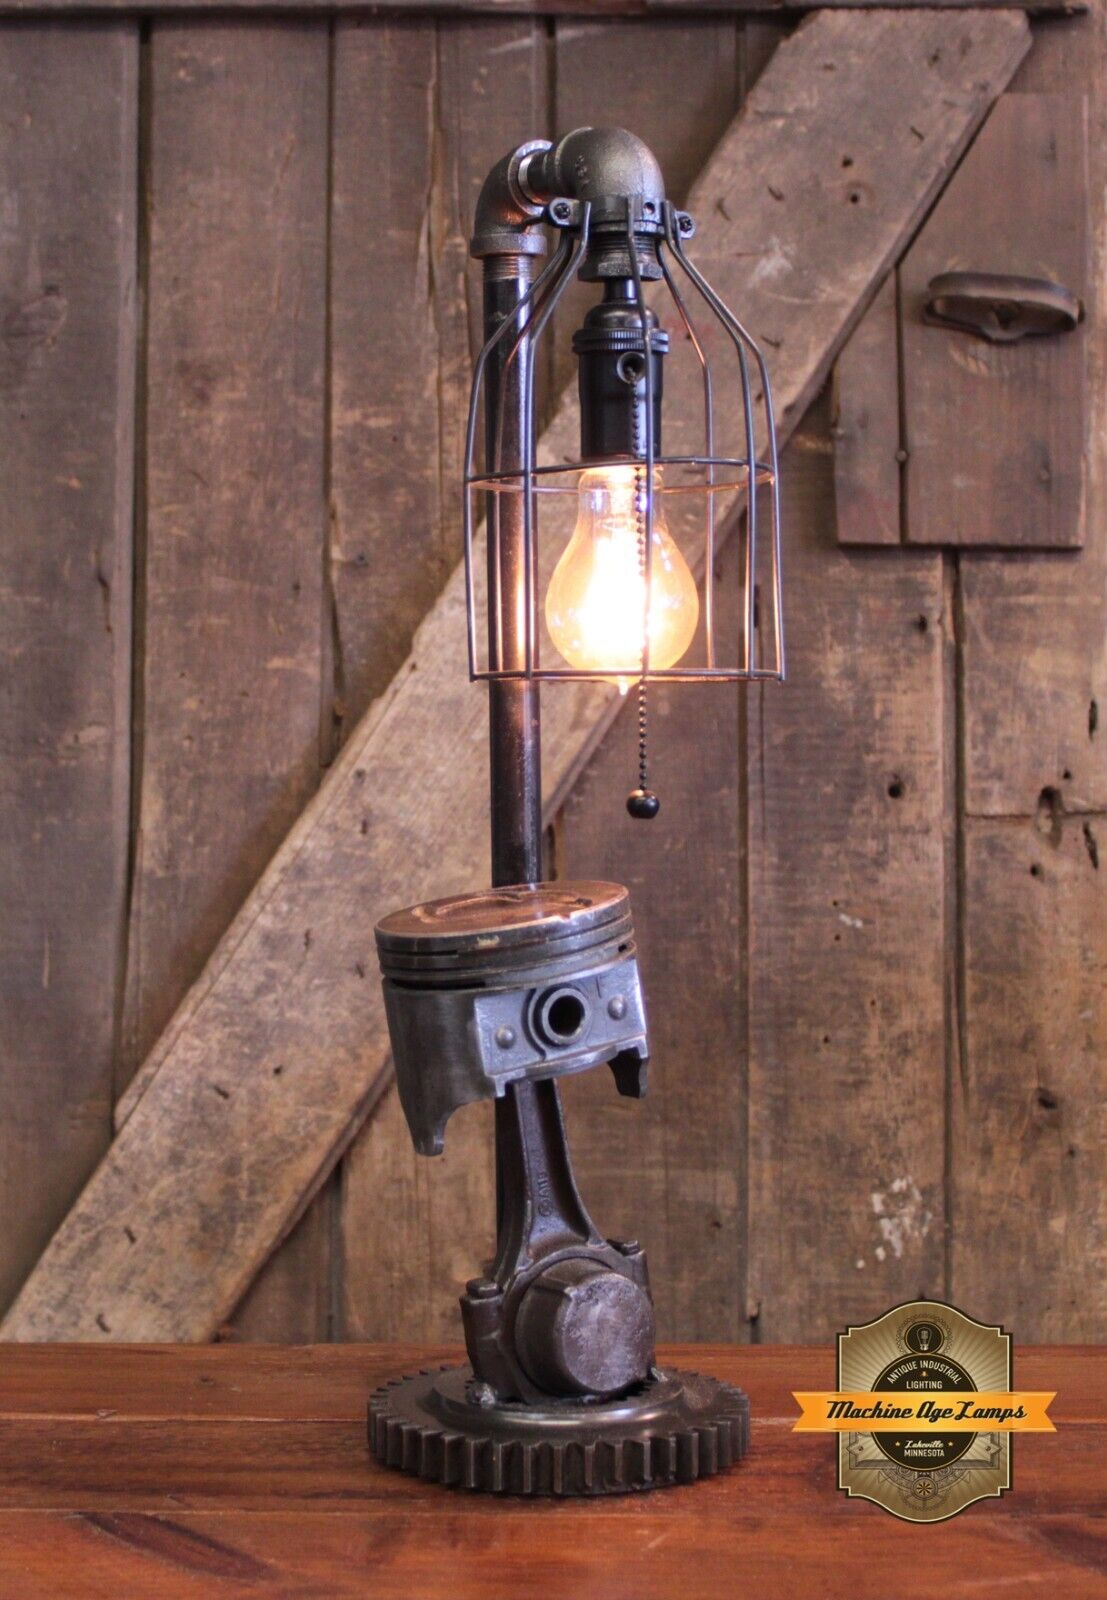 Steampunk Industrial Machine Age Lamp Vintage Piston and Gear Table Lamp